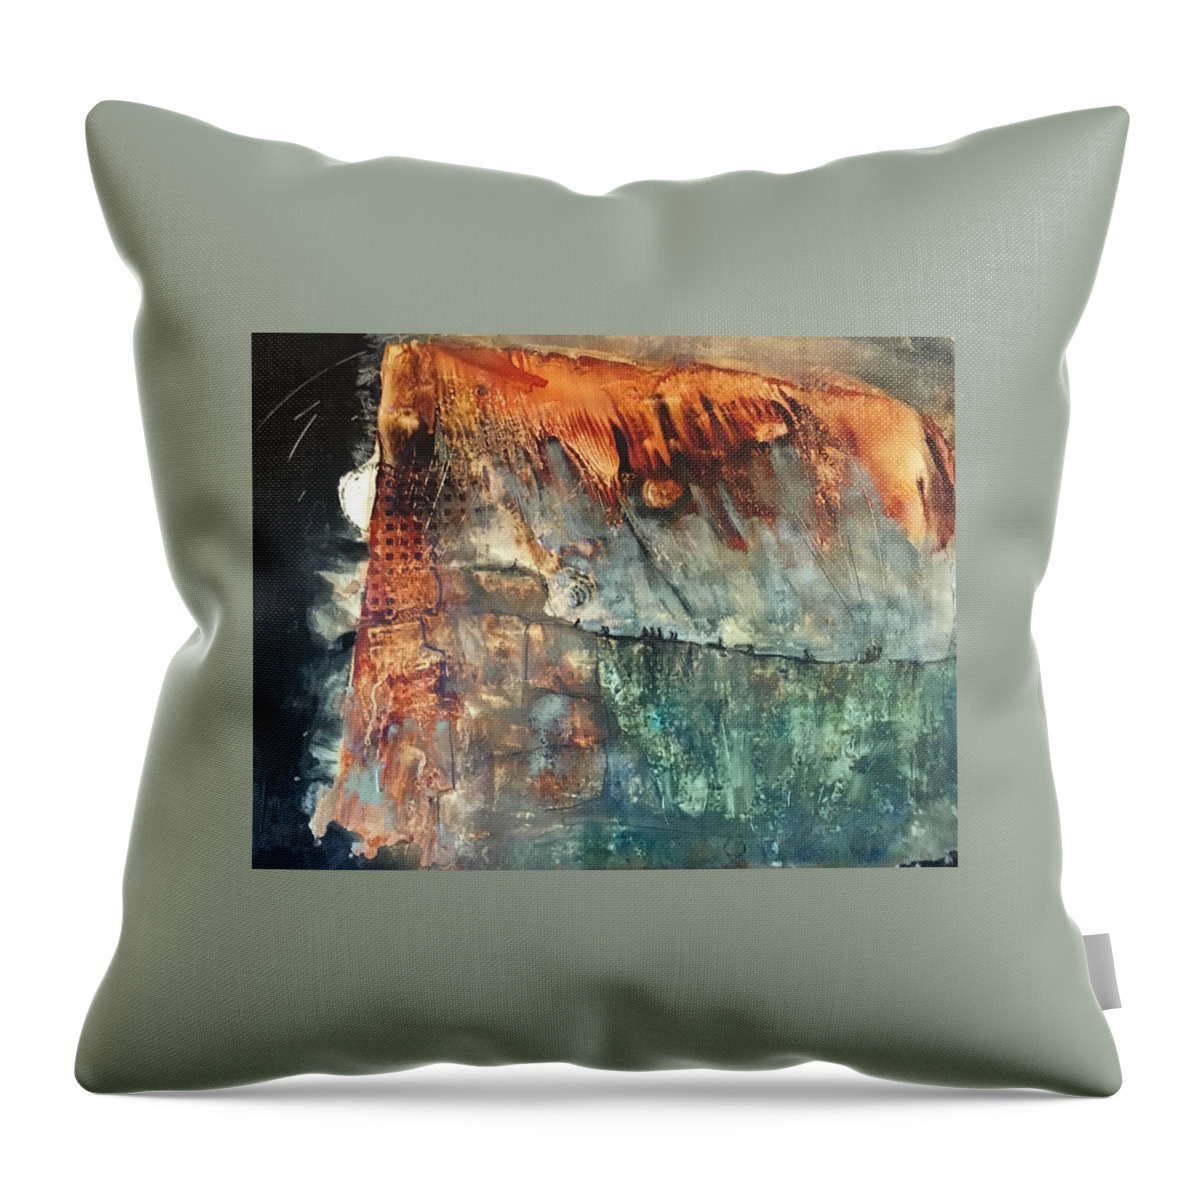 Tropical Throw Pillow featuring the painting The Trek by Carole Johnson